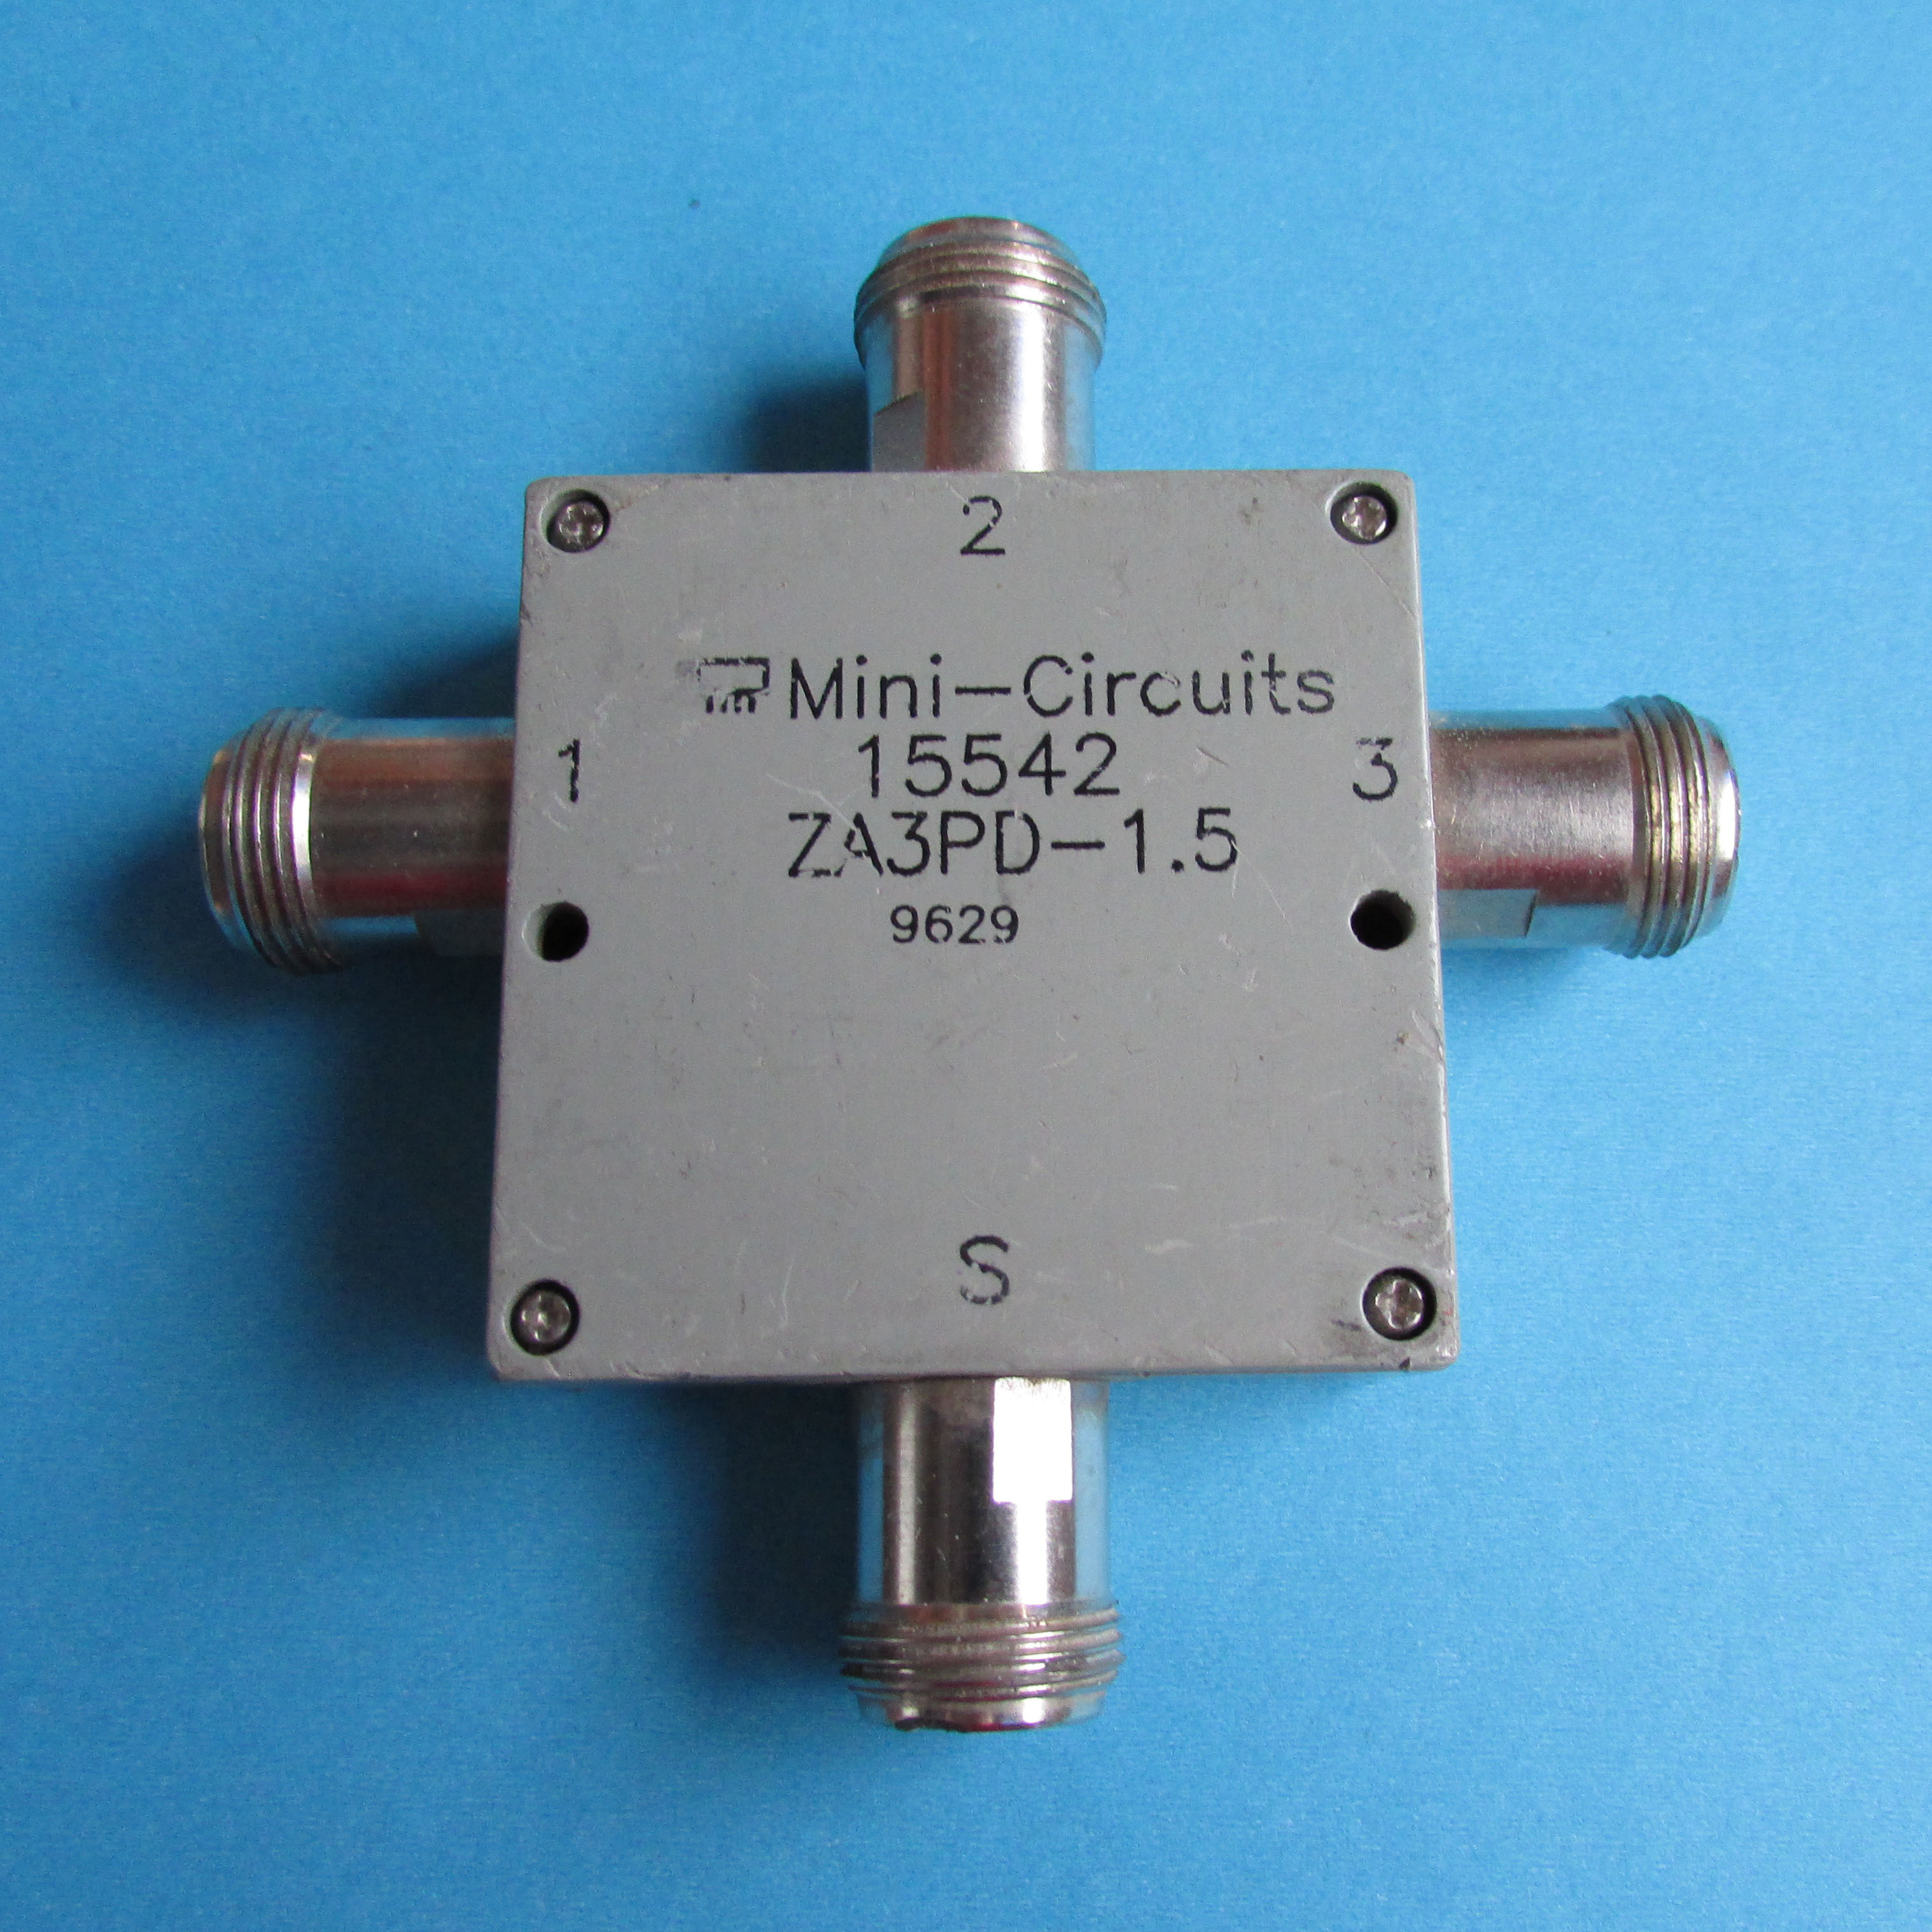 Mini-Circuits ZA3PD-1.5 750-1500 MHz N type one point three power divider